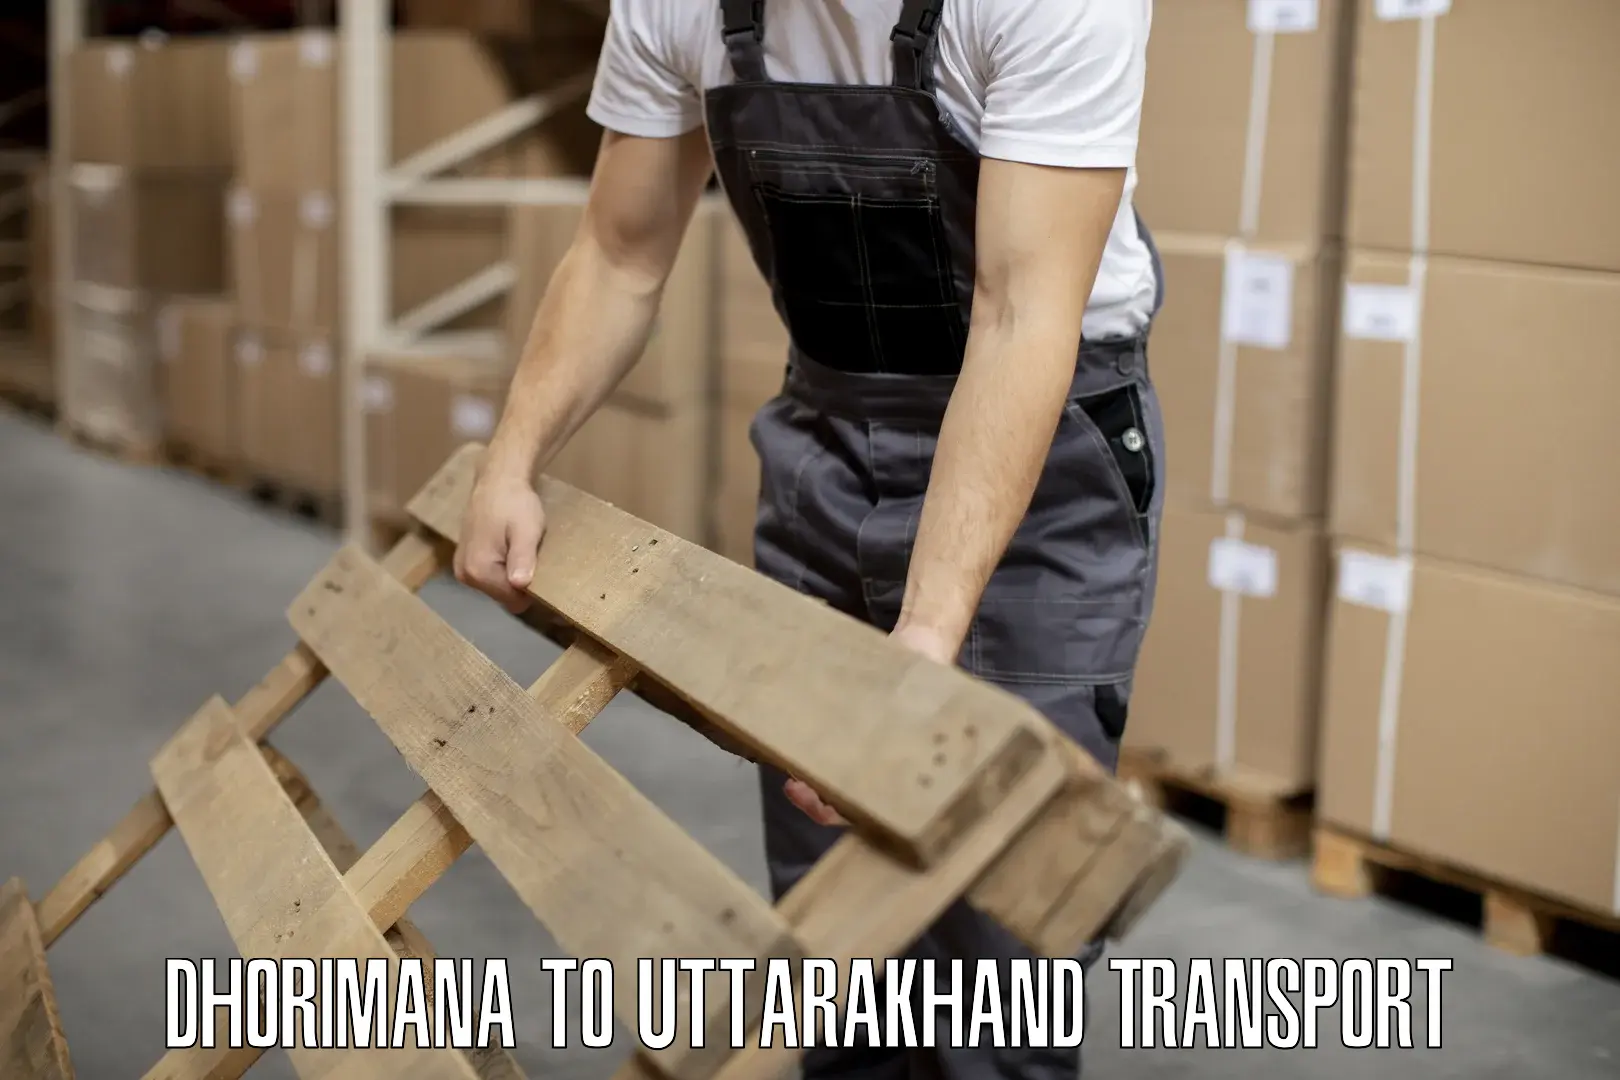 Air freight transport services Dhorimana to Khatima